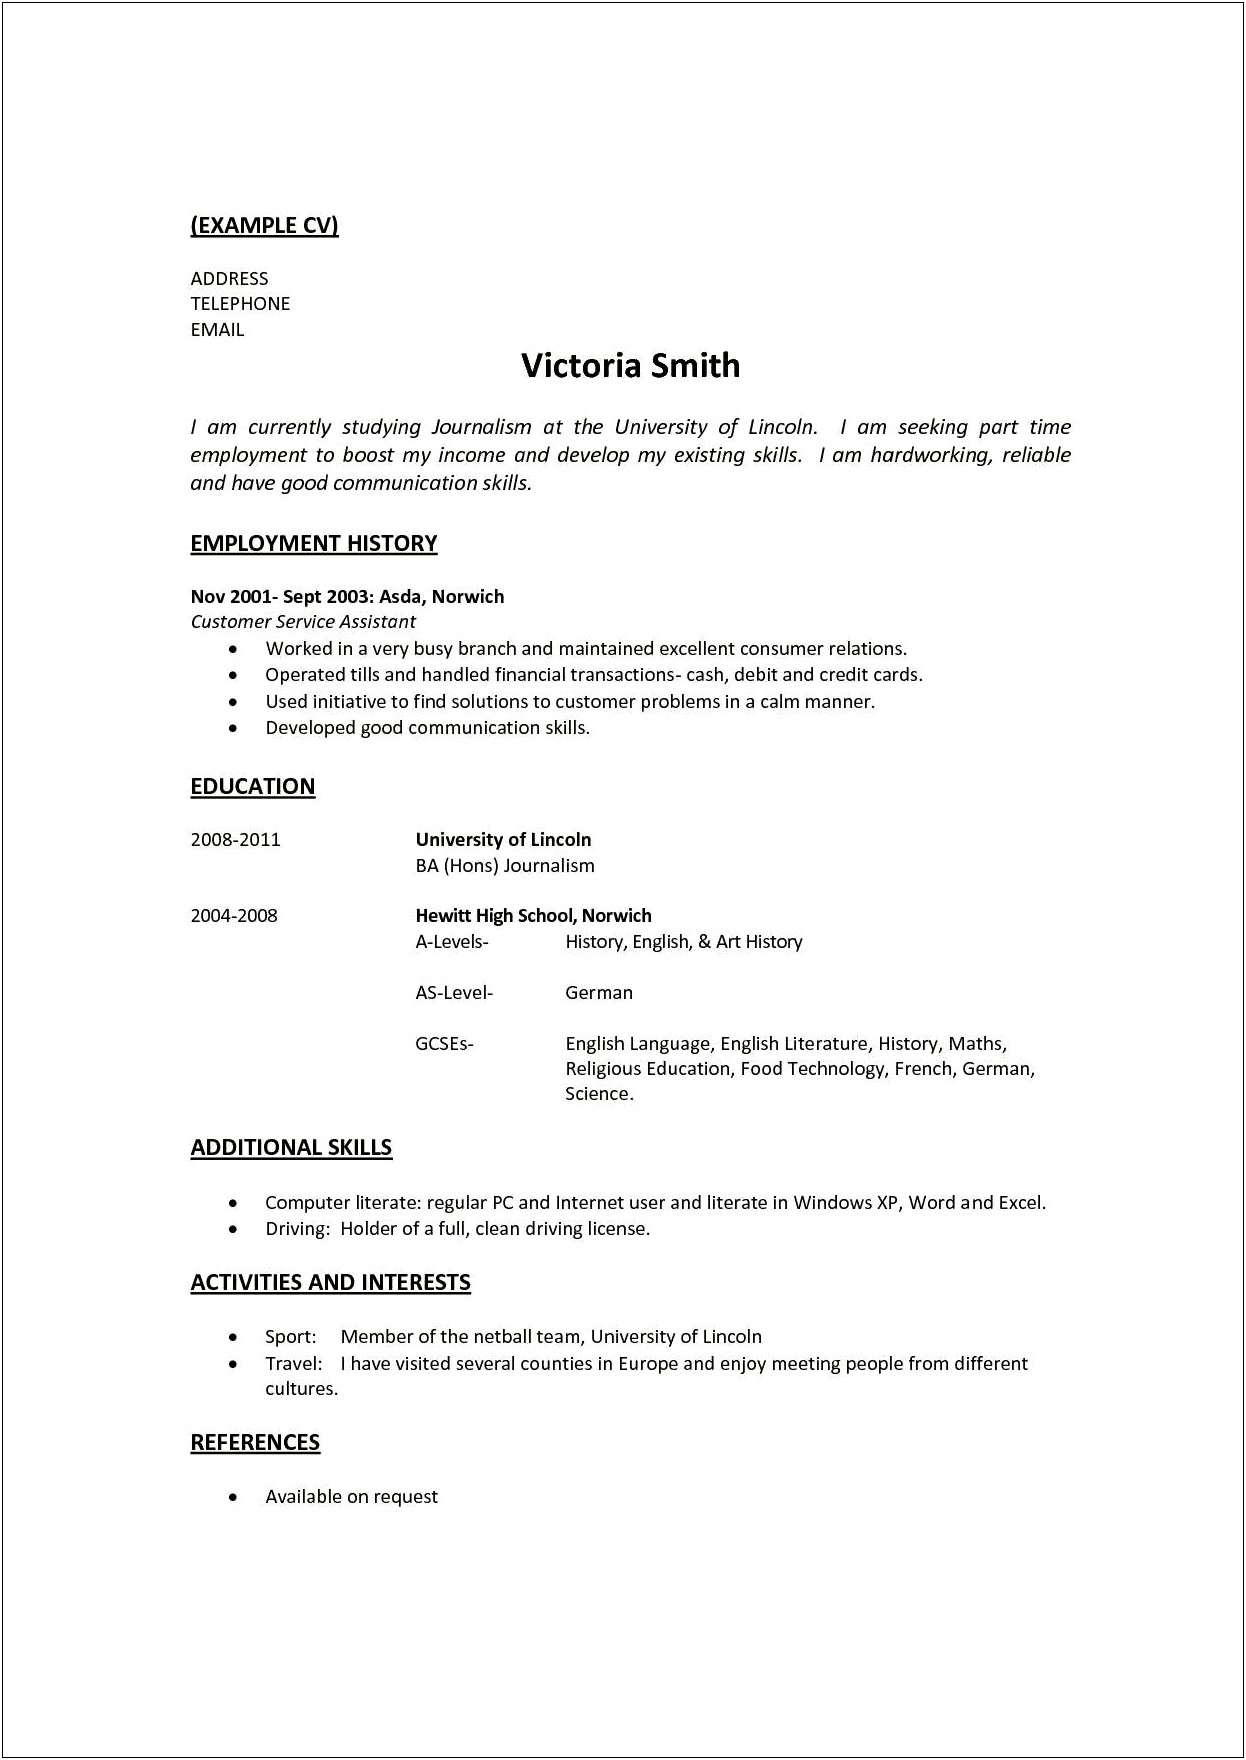 Resume Format With Job Experience